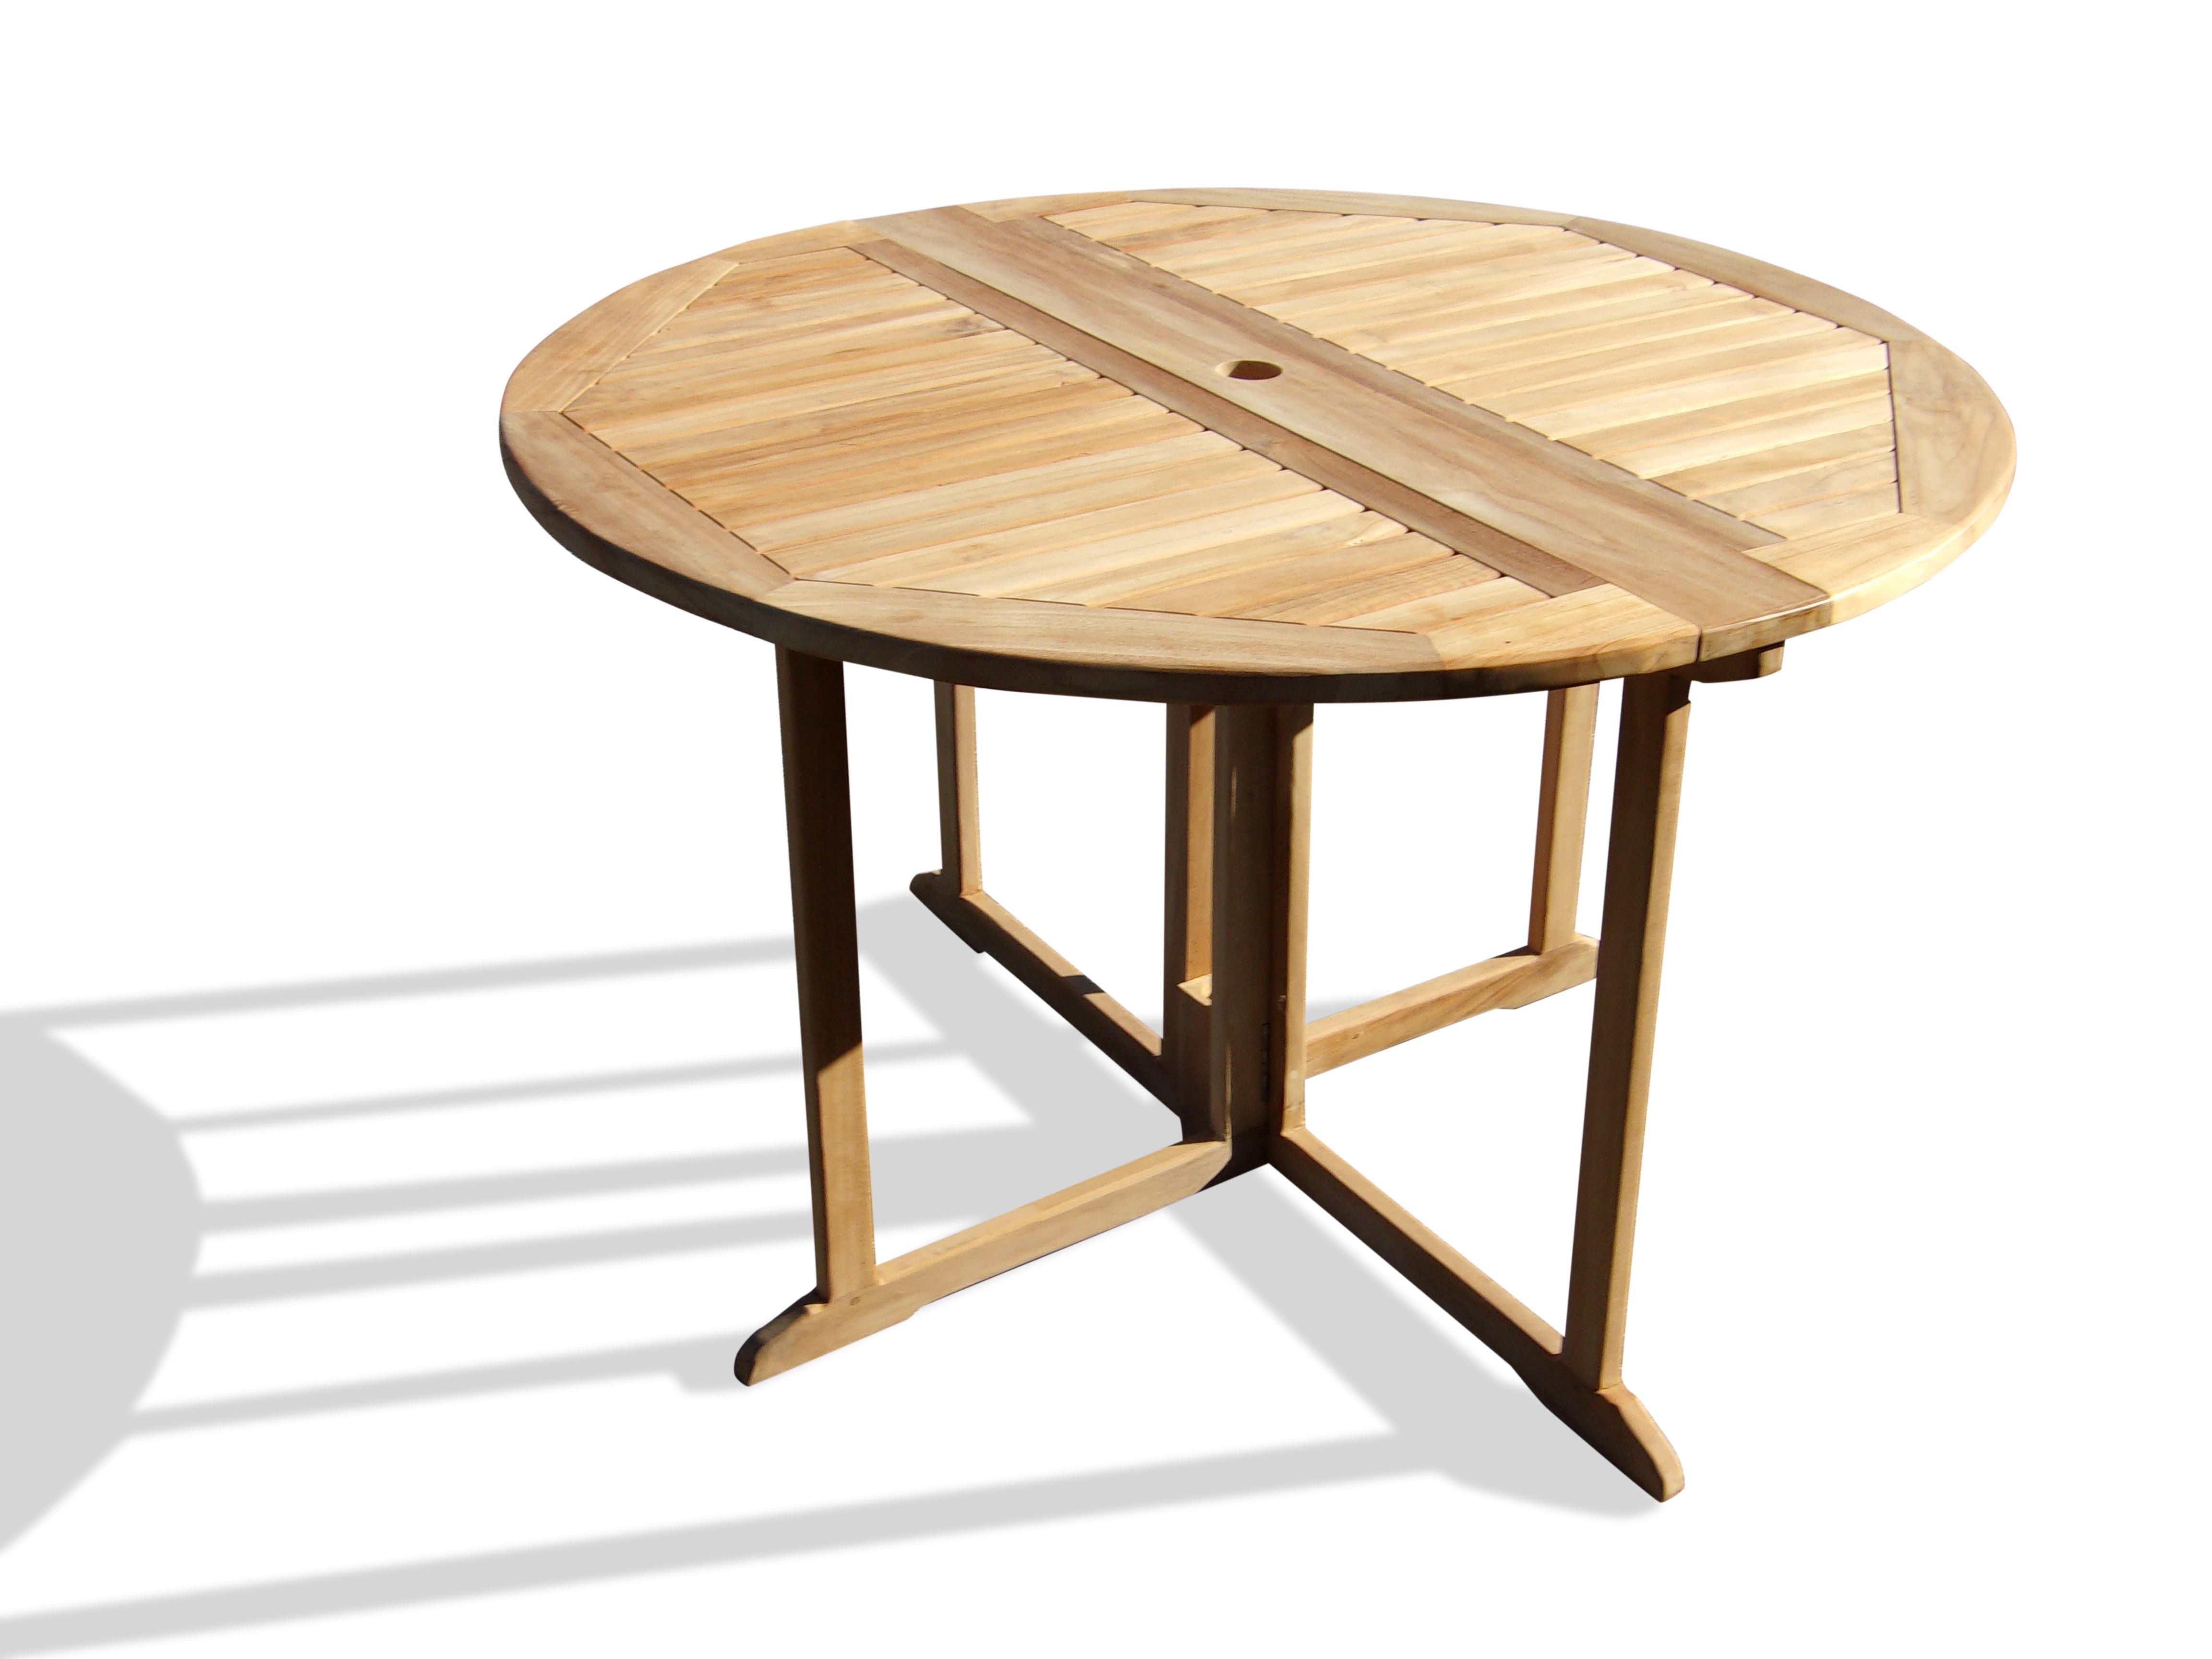 Barcelone Round Drop Leaf Folding 47" Teak Dining Table ...use with 1 Leaf Up or 2.... Makes 2 different tables...